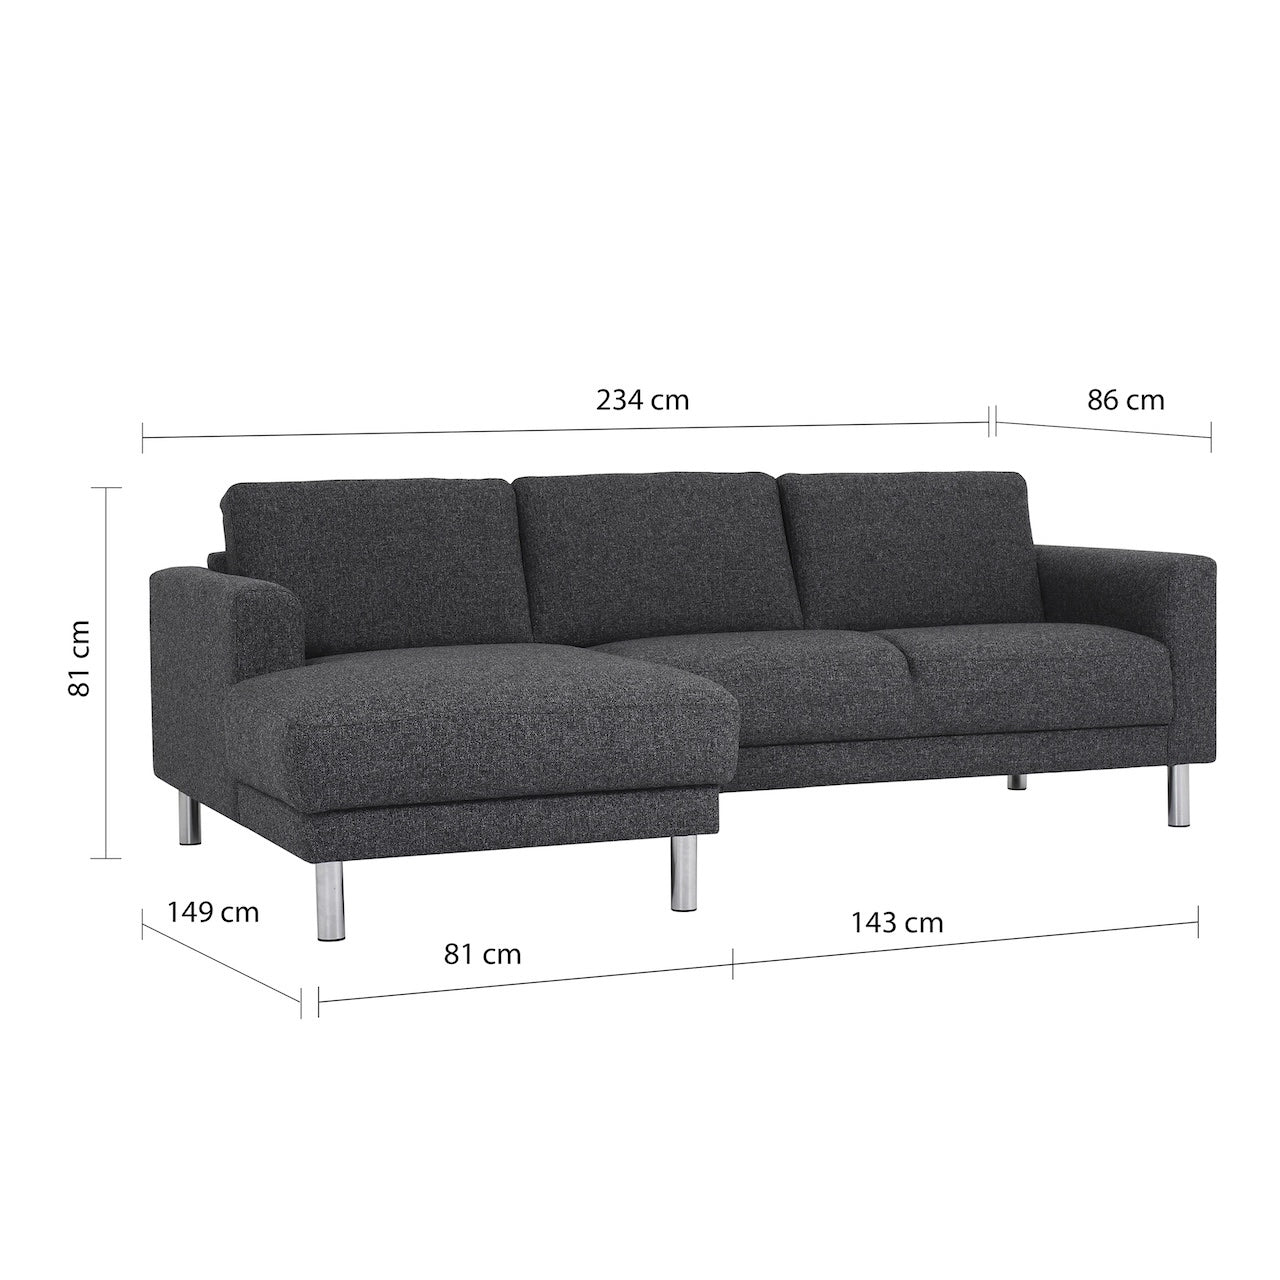 Furniture To Go Cleveland Chaiselongue Sofa (LH) in Nova Anthracite